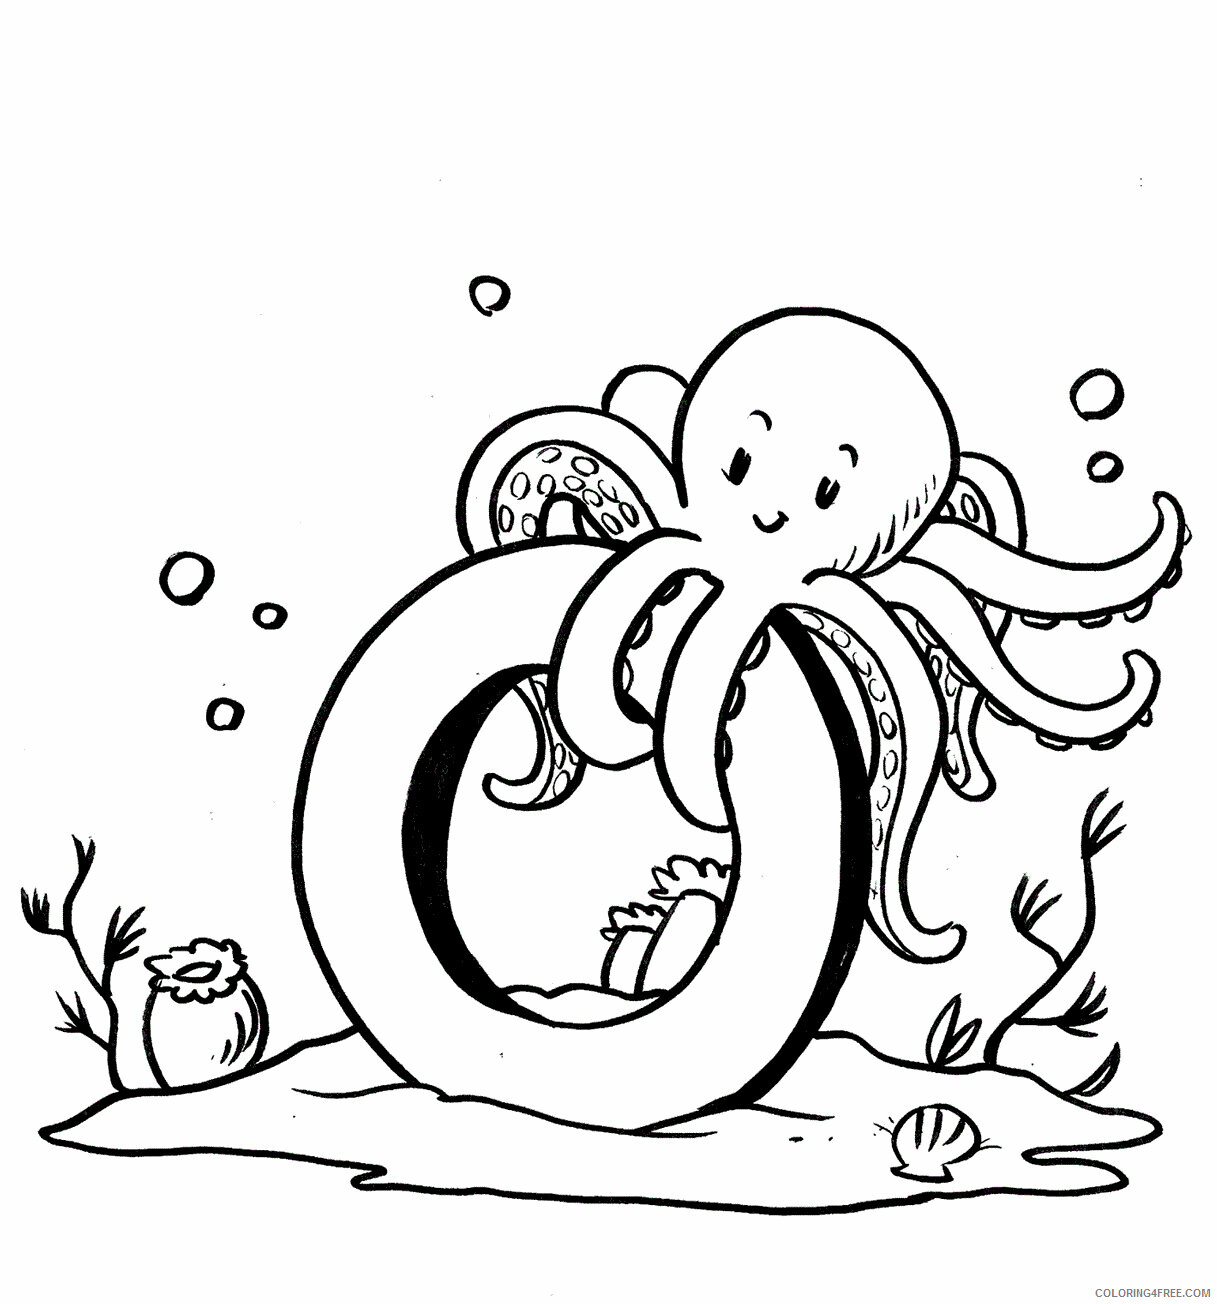 Octopus Coloring Pages Animal Printable Sheets O for Octopus 2021 3537 Coloring4free